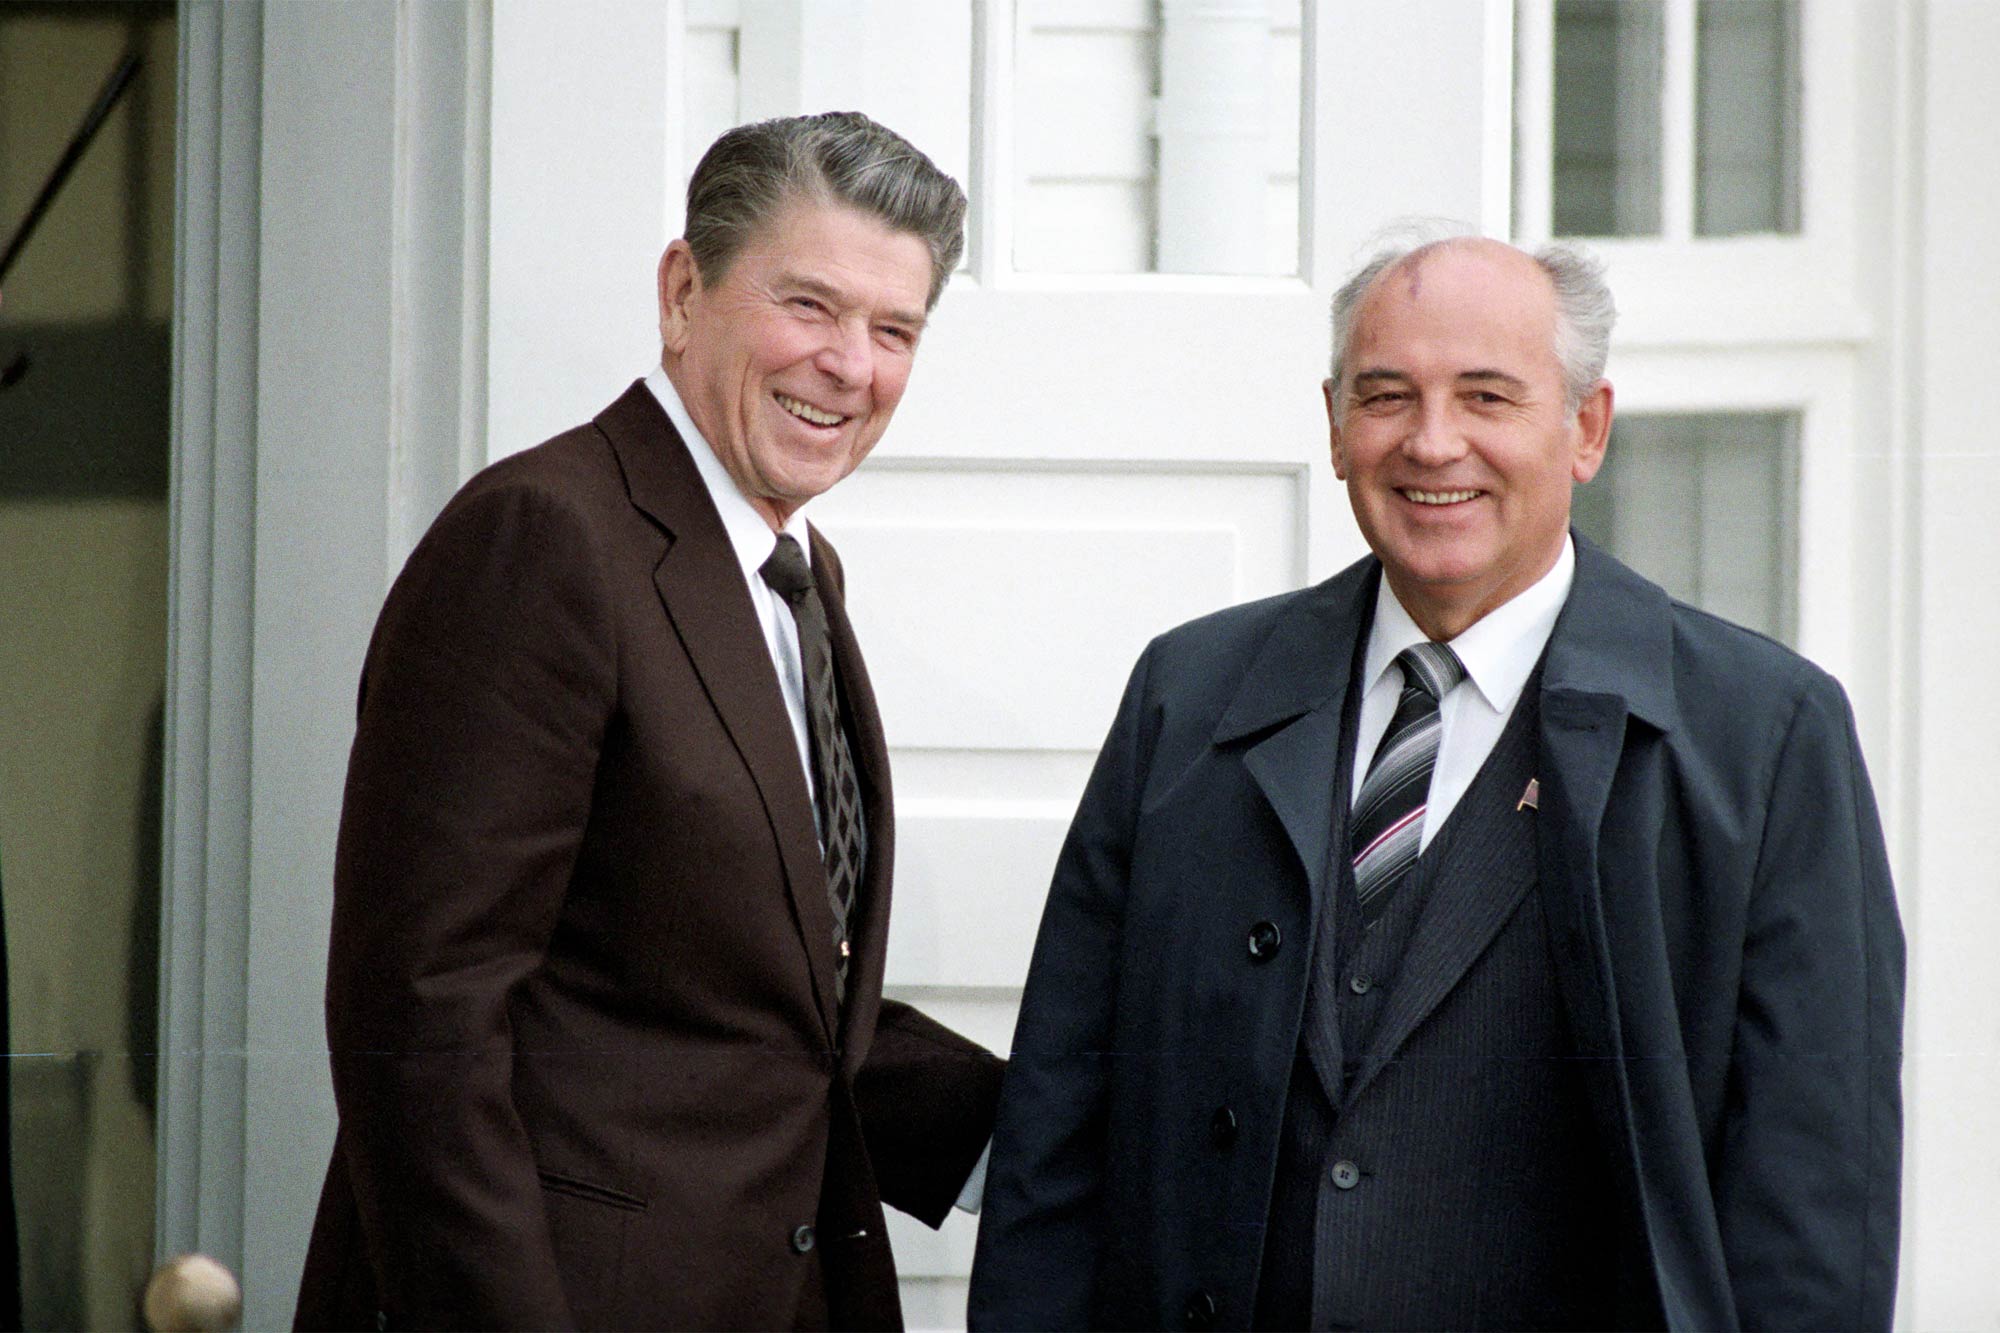 Ronald Reagan and Mikhail Gorbachev stand together and smile